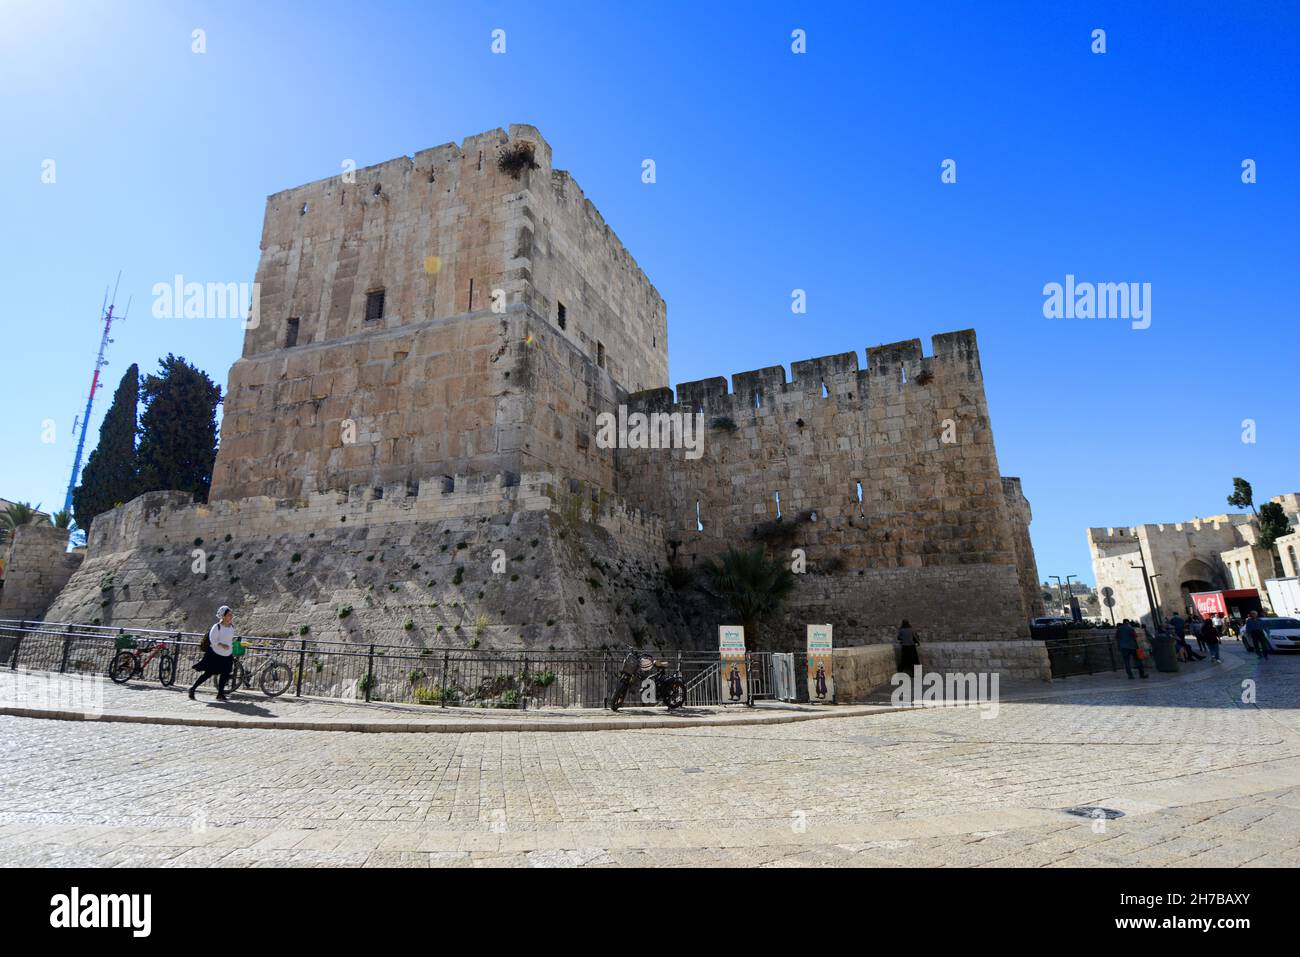 The Citadel near Jaffa gate in the old city of Jerusalem. Stock Photo